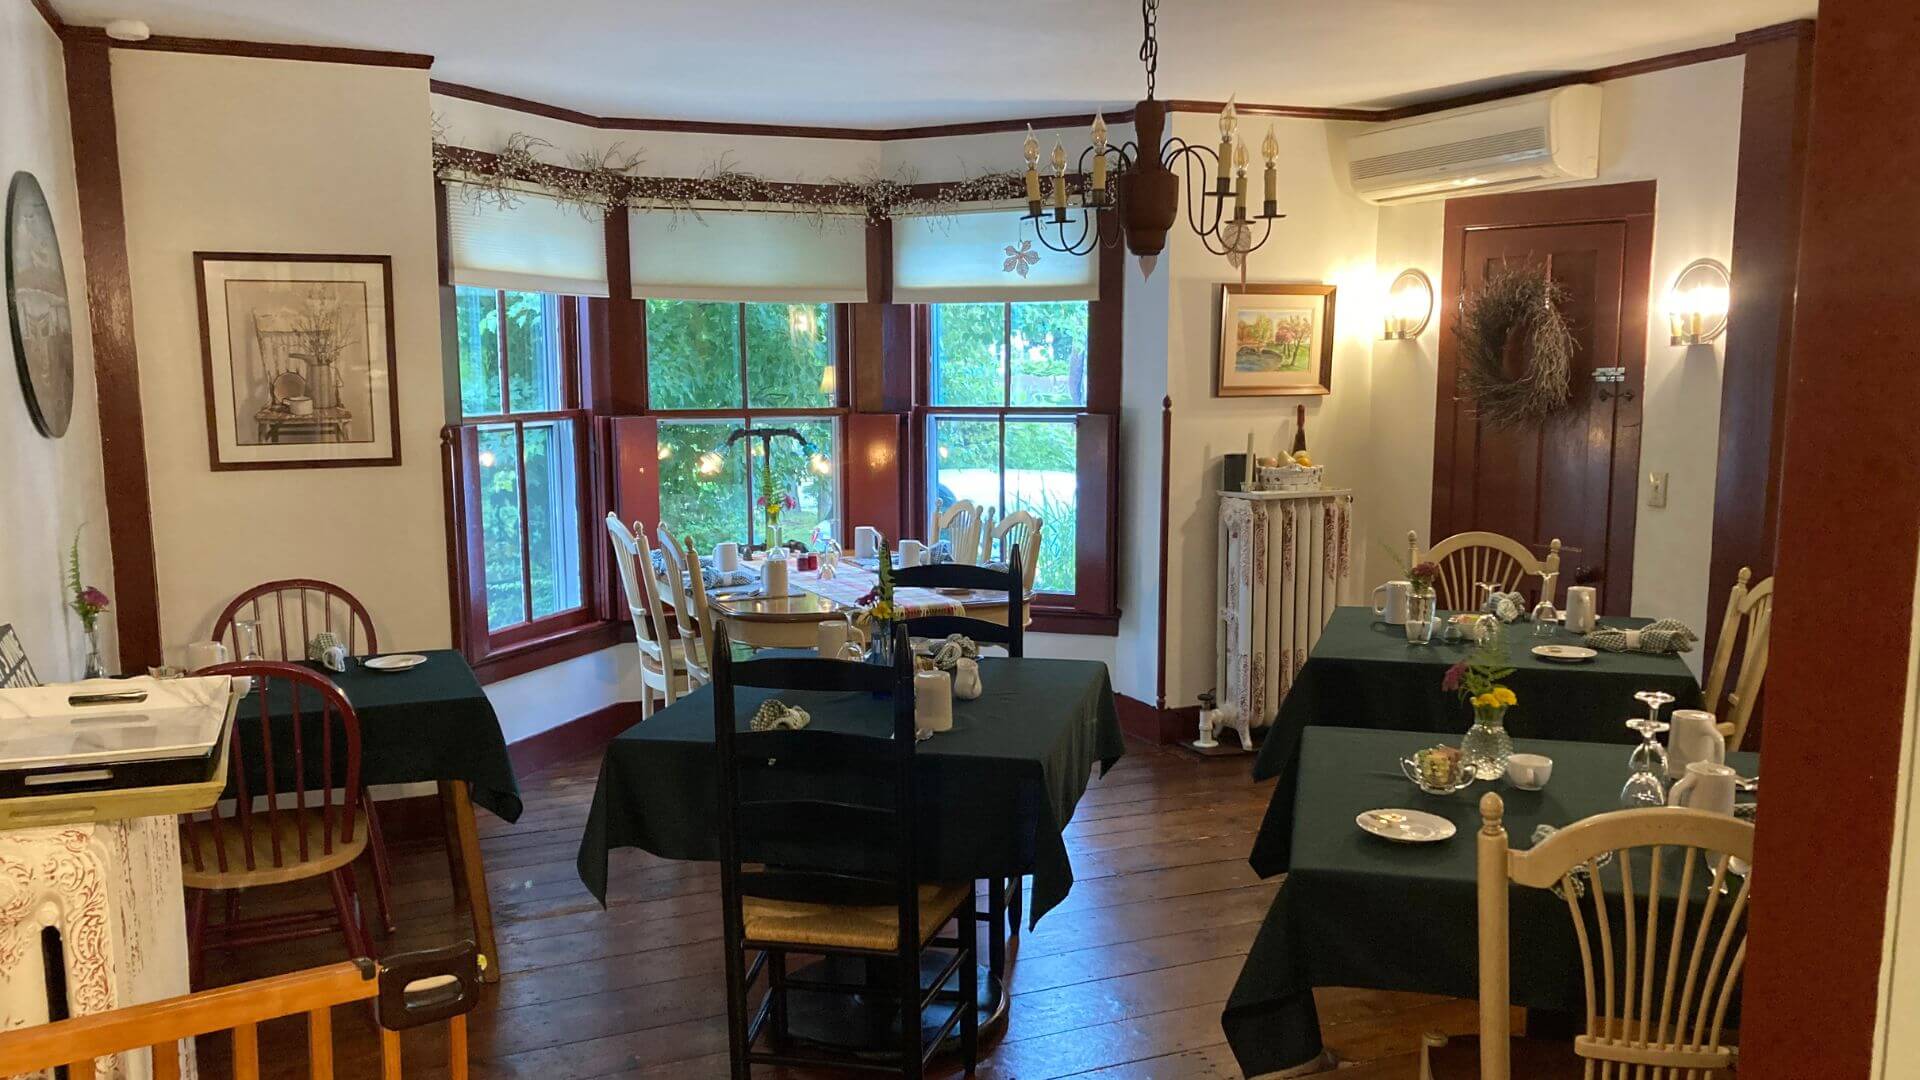 Breakfast room in a home with large bay window and five tables set with green tablecloths